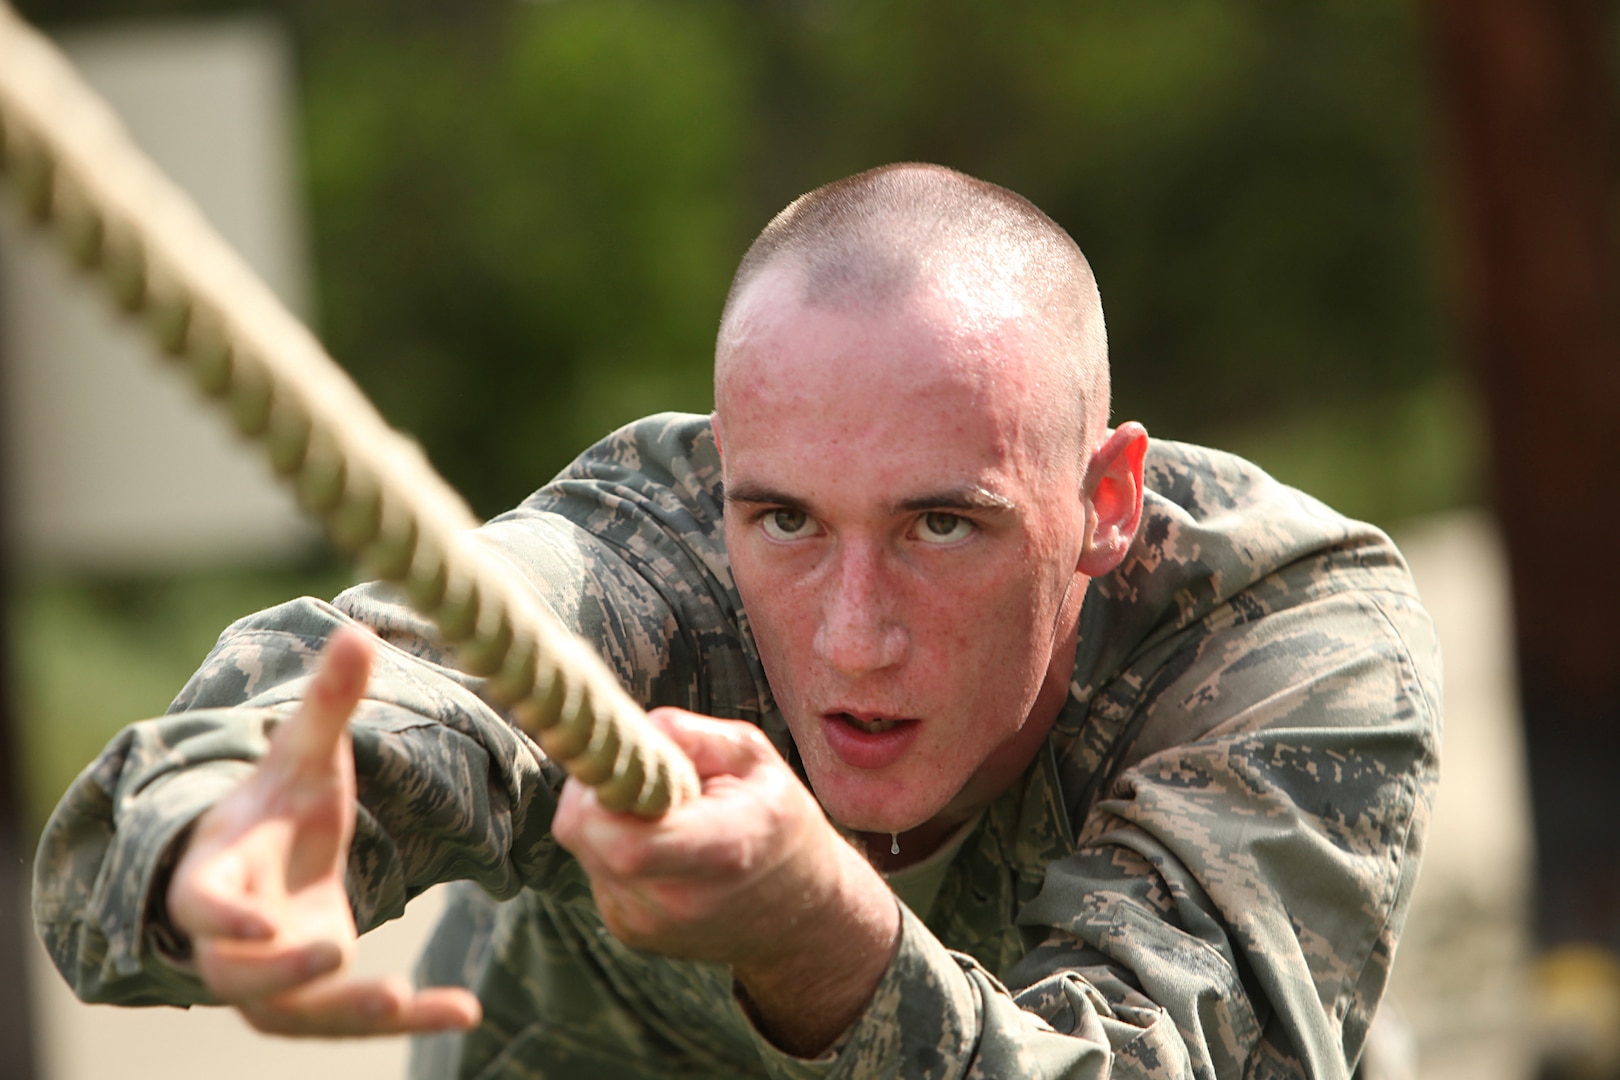 An Air Force Basic Military Training trainee completes an obstacle June 30. The BMT obstacle course tests a trainee's strength, endurance, and will power. (U.S. Air Force photo/Robbin Cresswell)